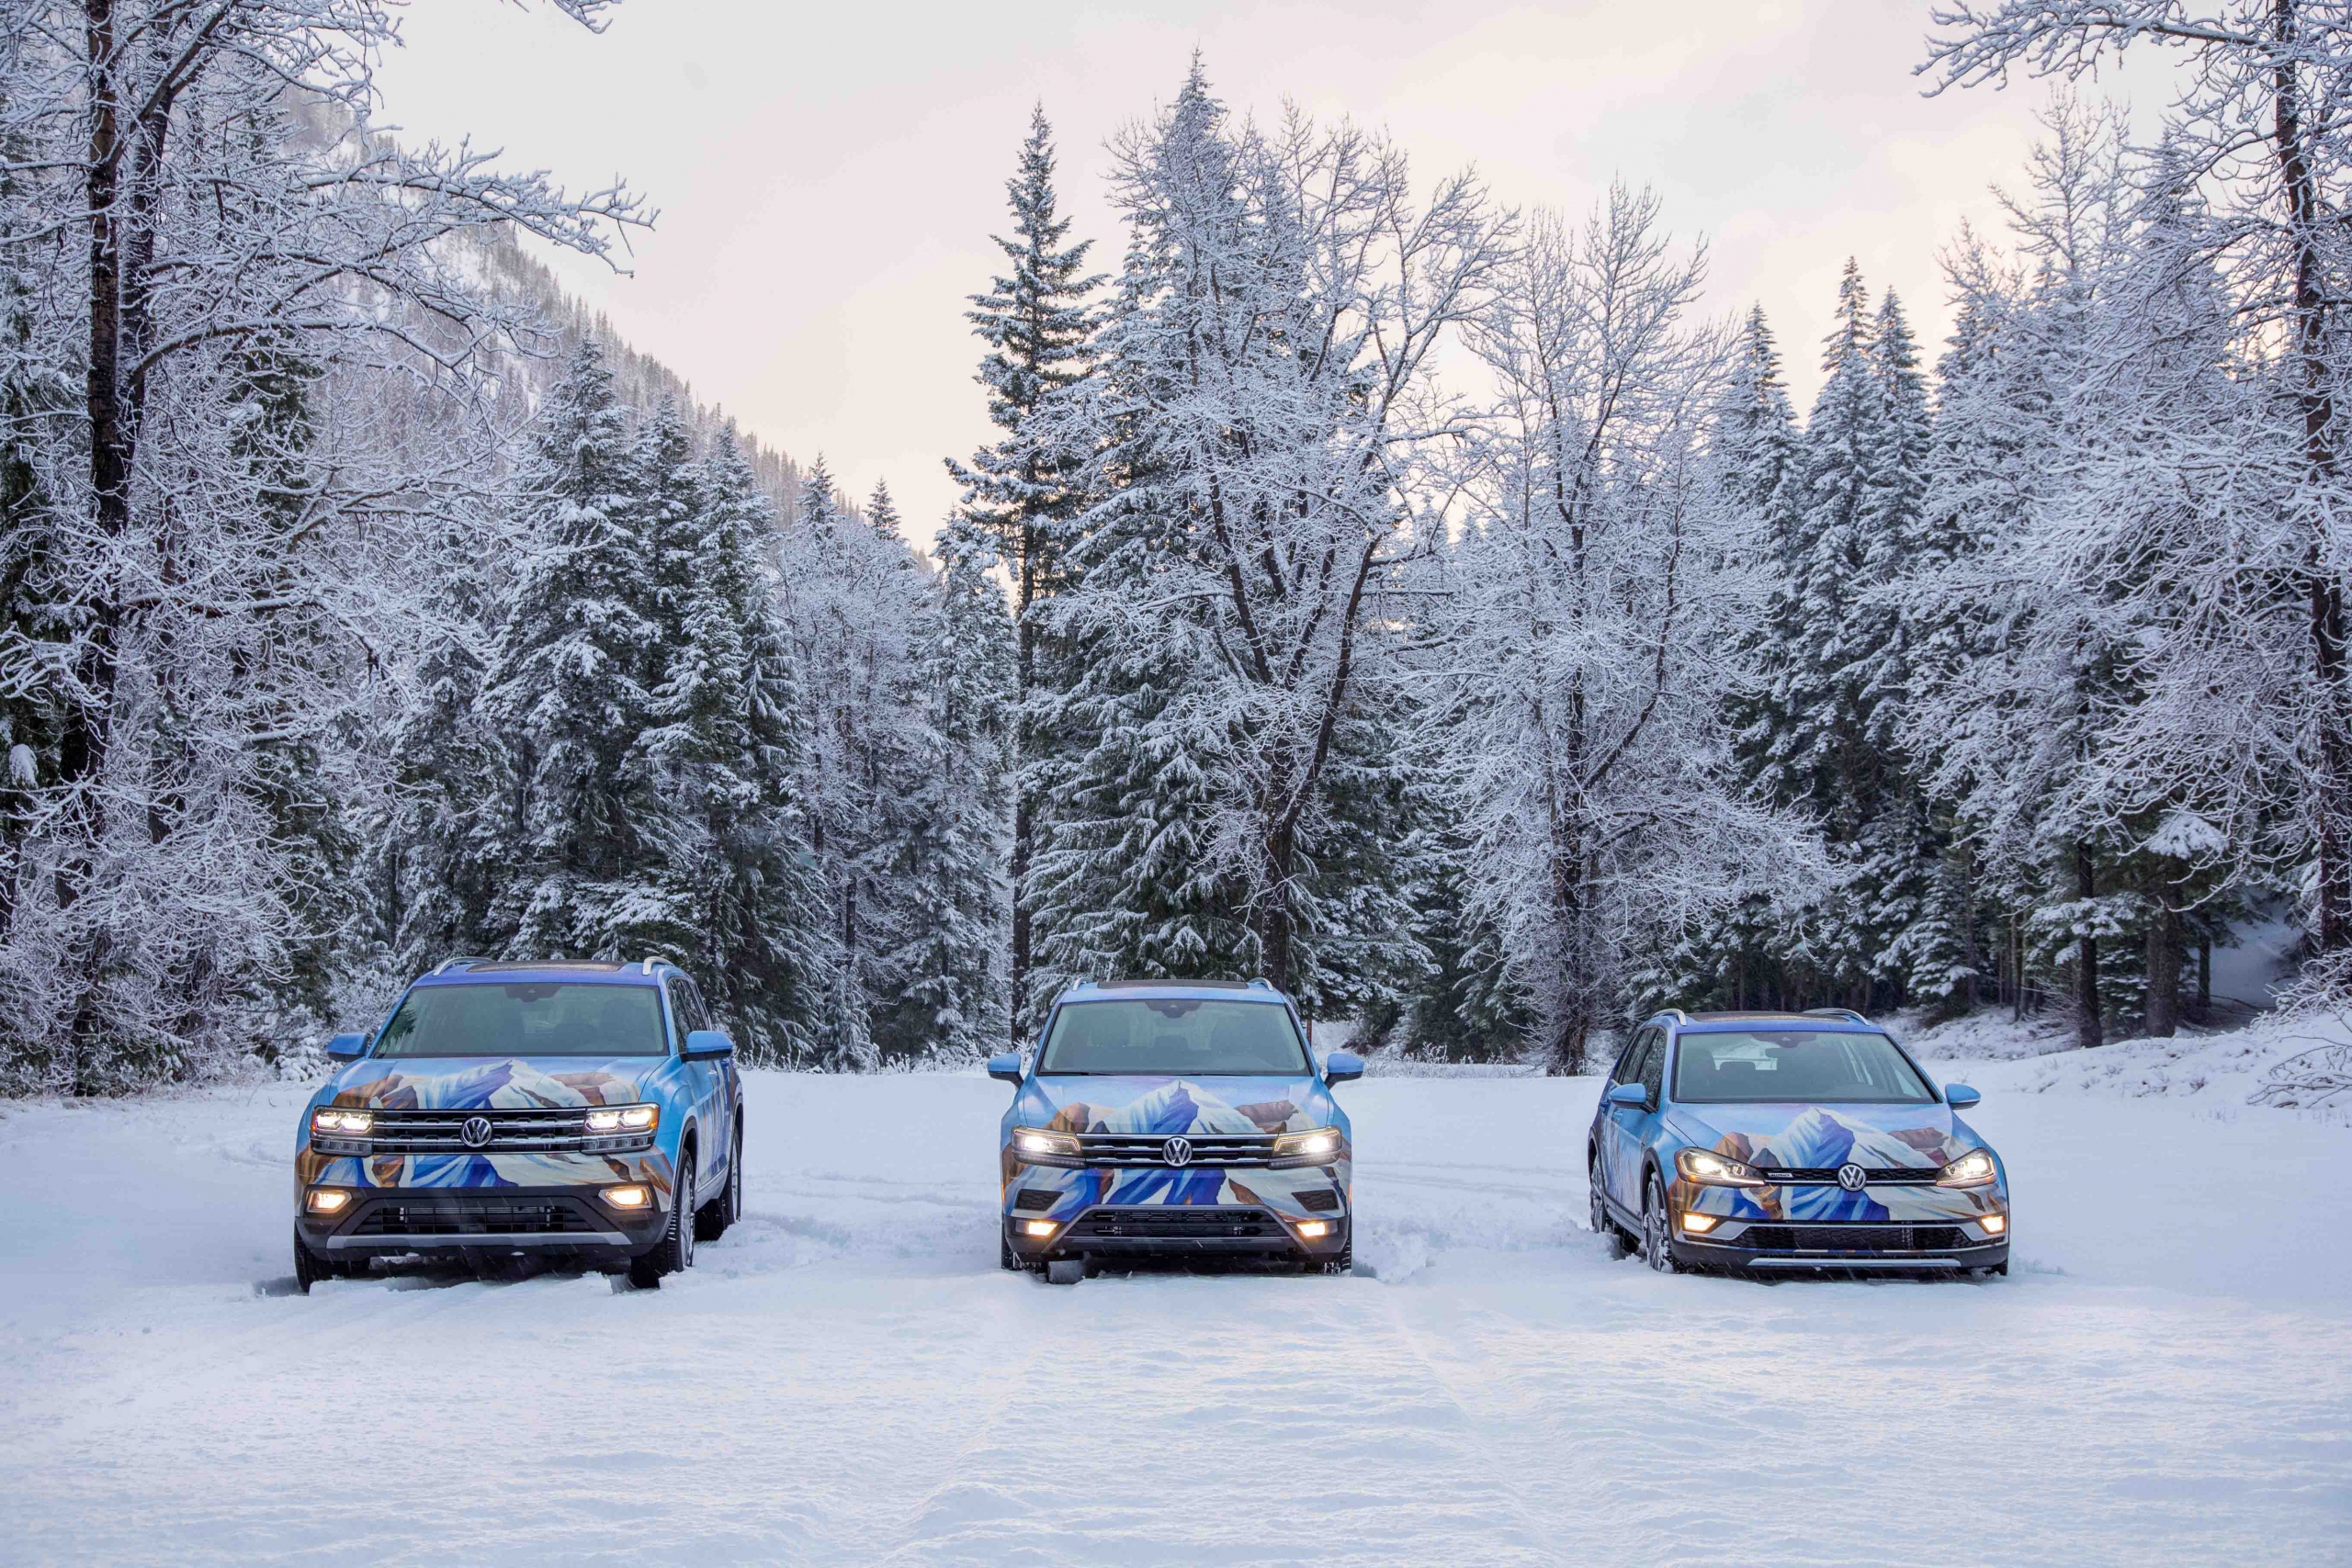 The PSIA-AASI custom painted Atlas Tiguan and Alltrack are parked in a snow covered parking area facing the camera